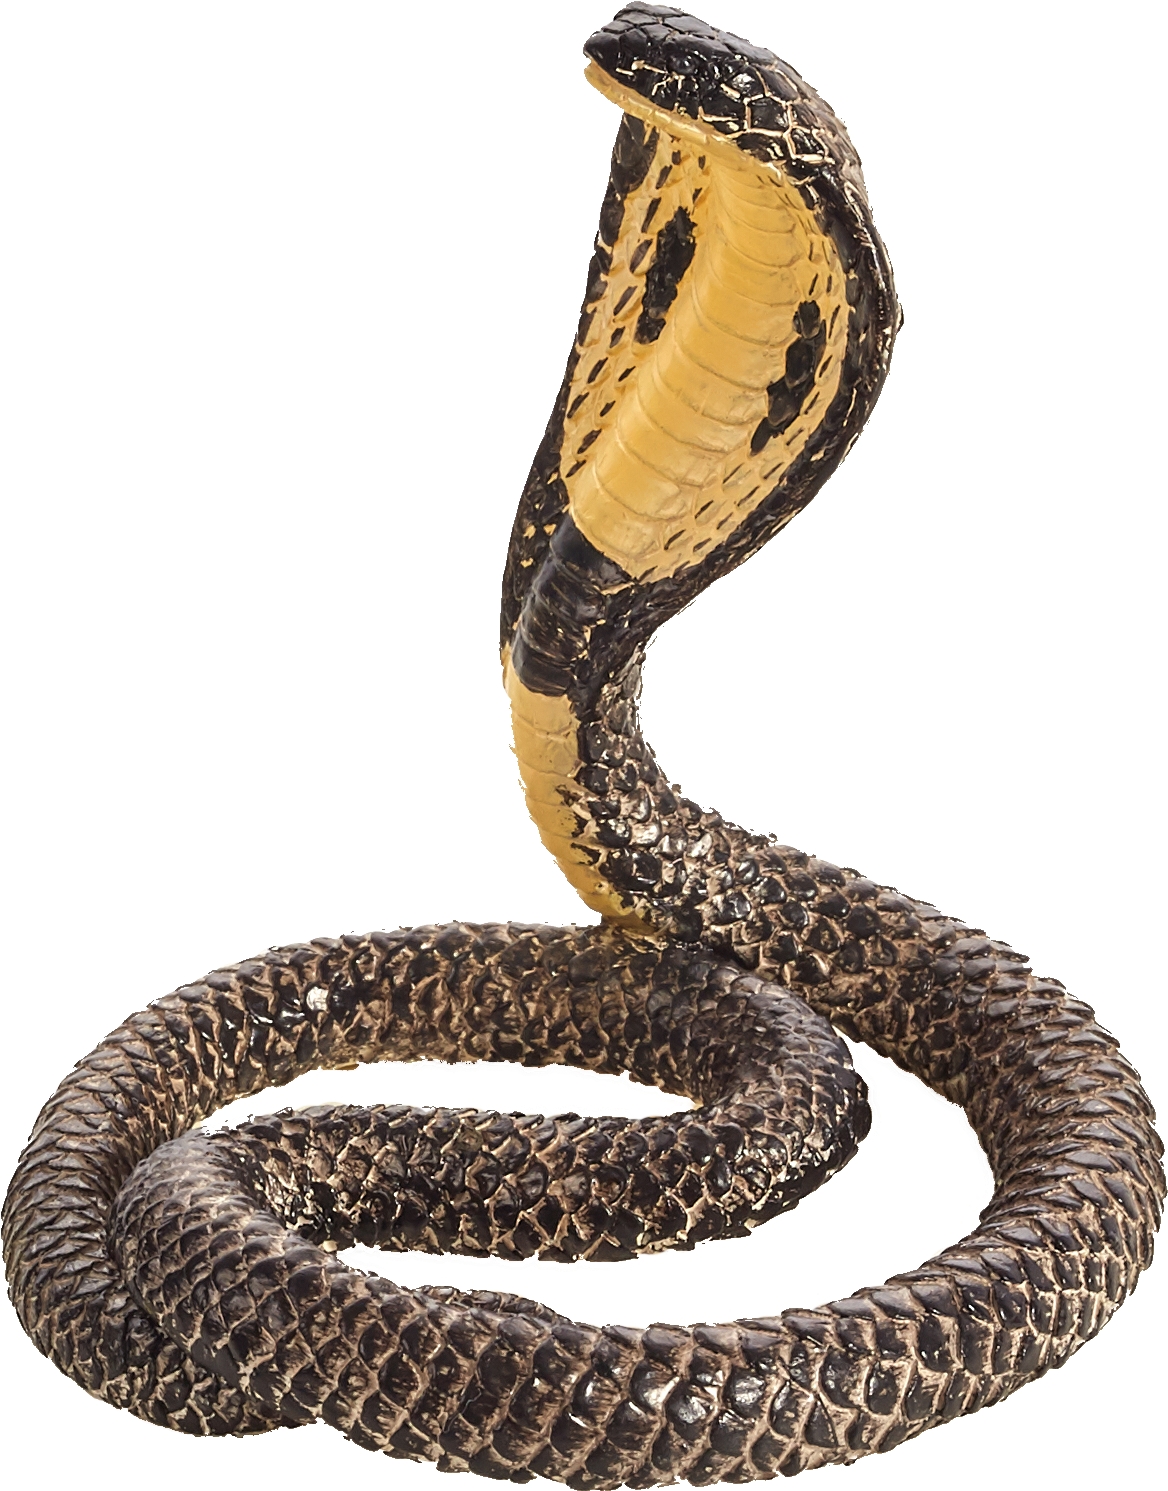 A Snake With A Black Background